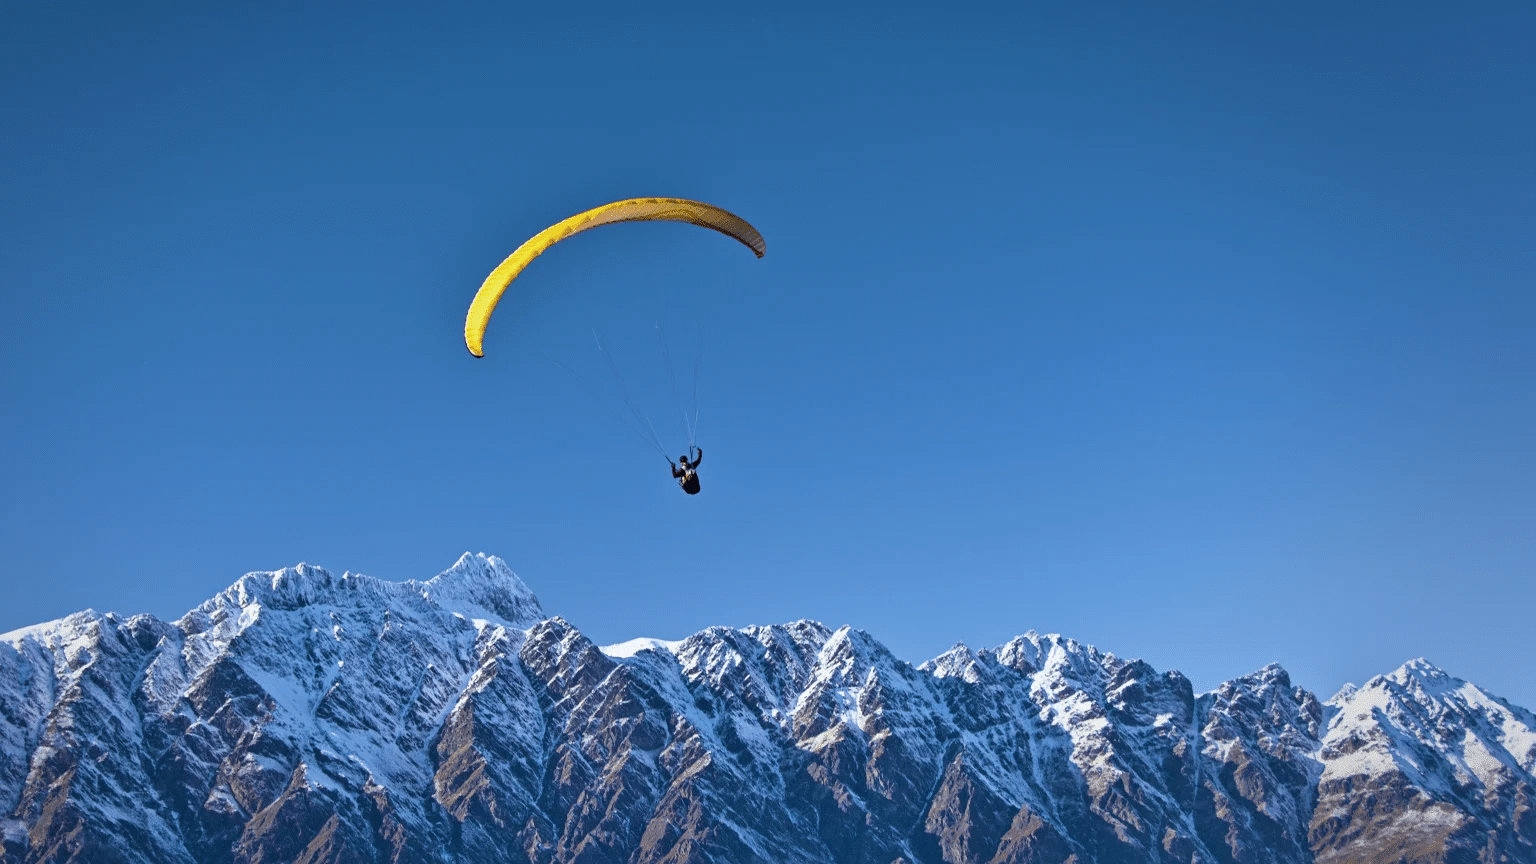 View the World from Sky While Paragliding 